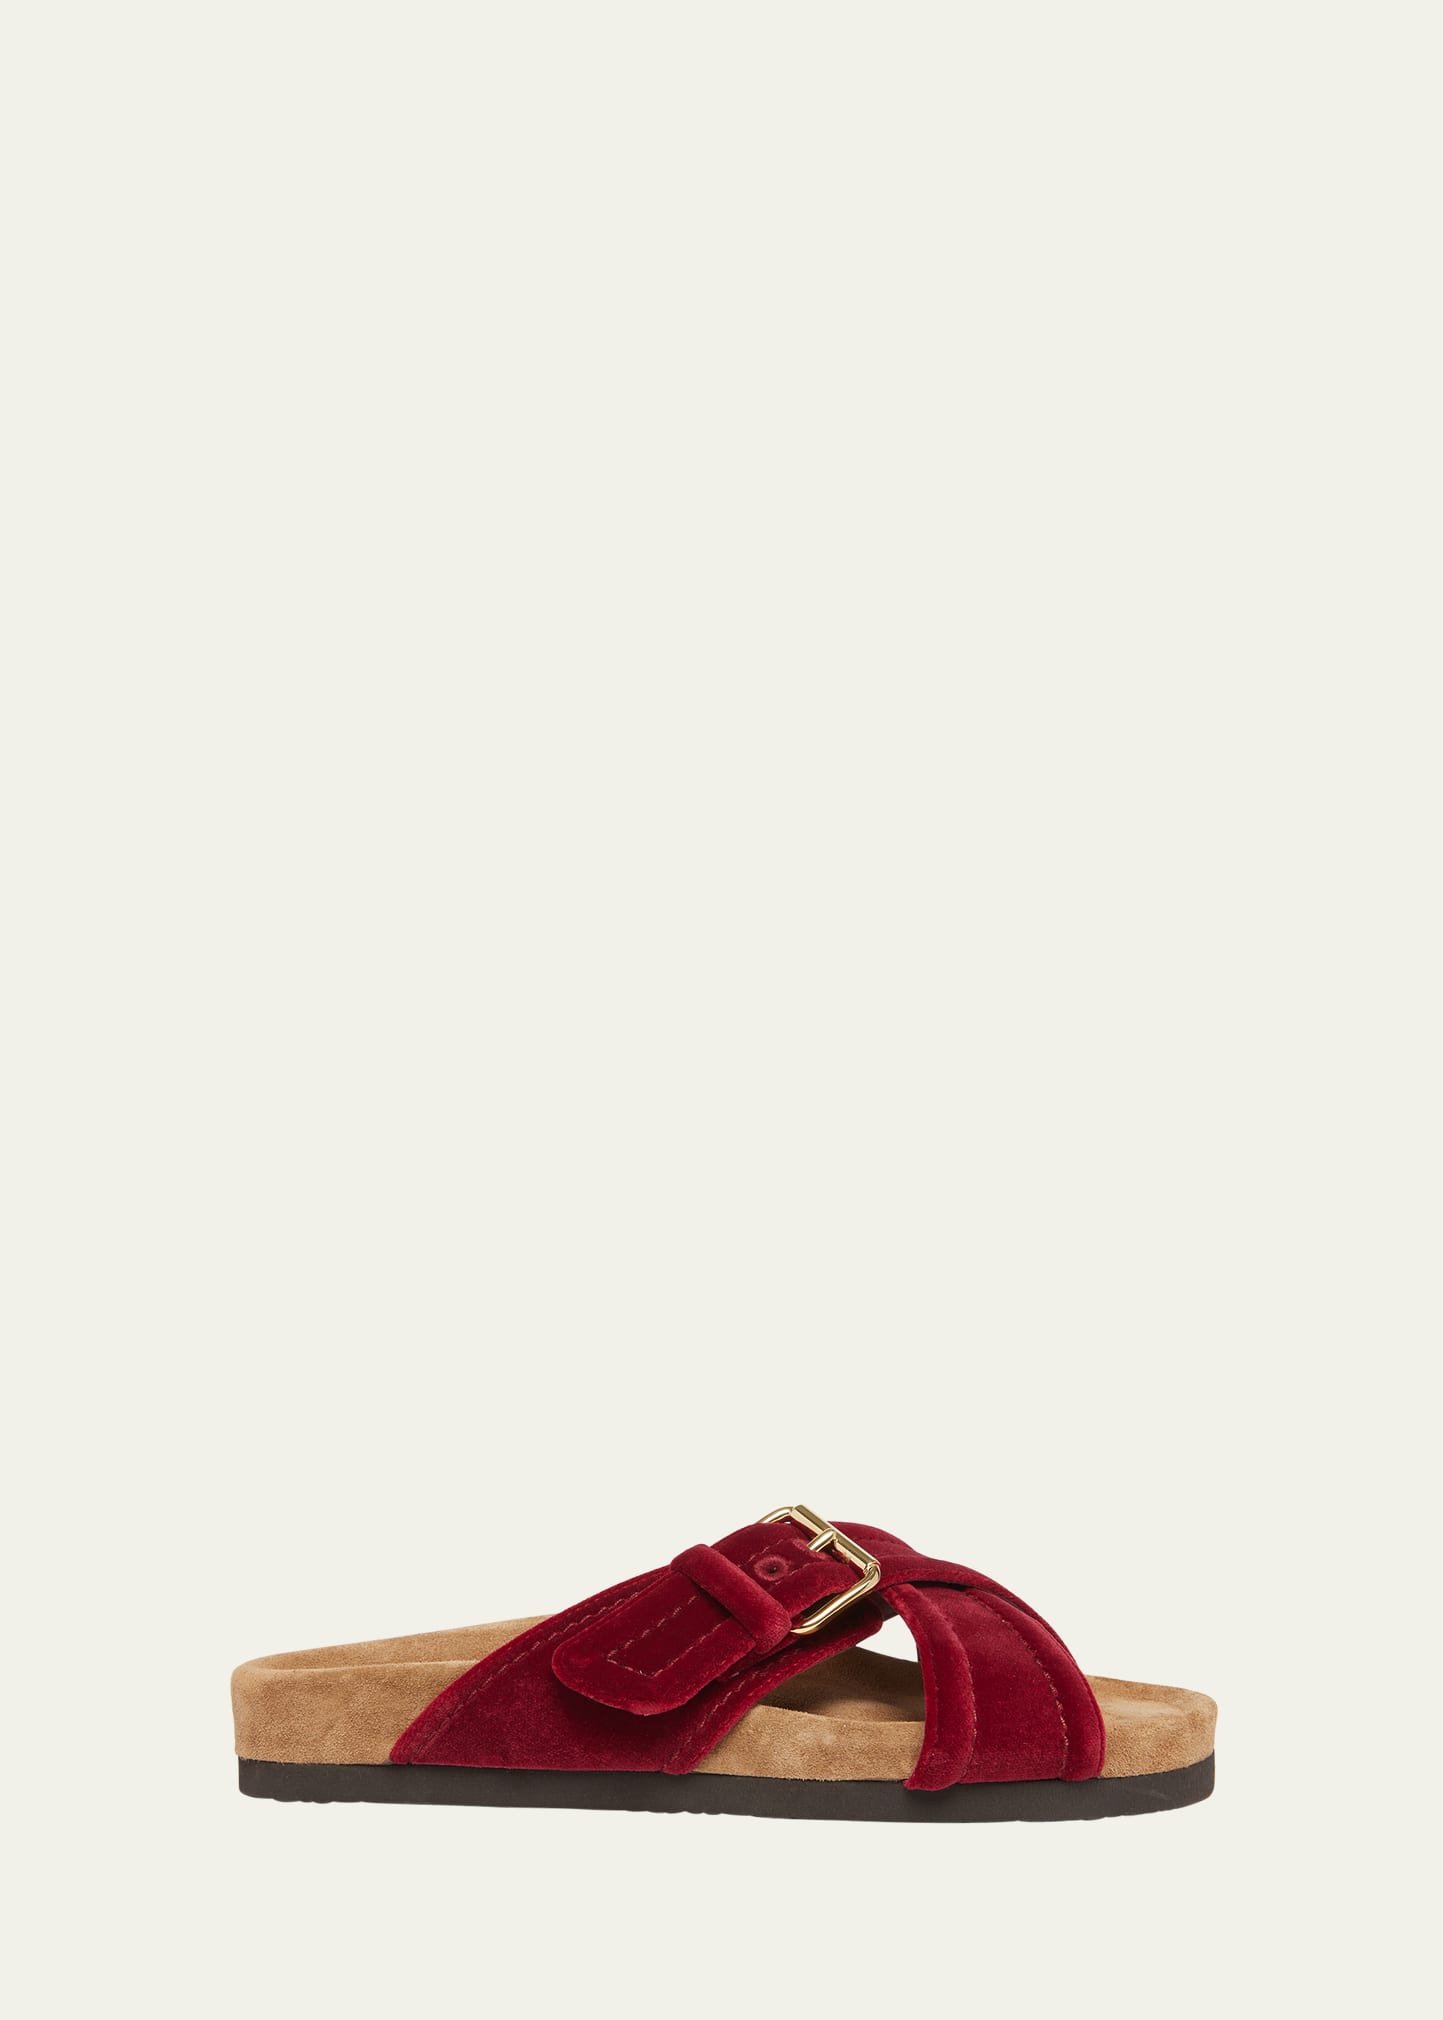 Shop Valentino Anywhere Crisscross Buckle Slide Sandals In Cerise Red